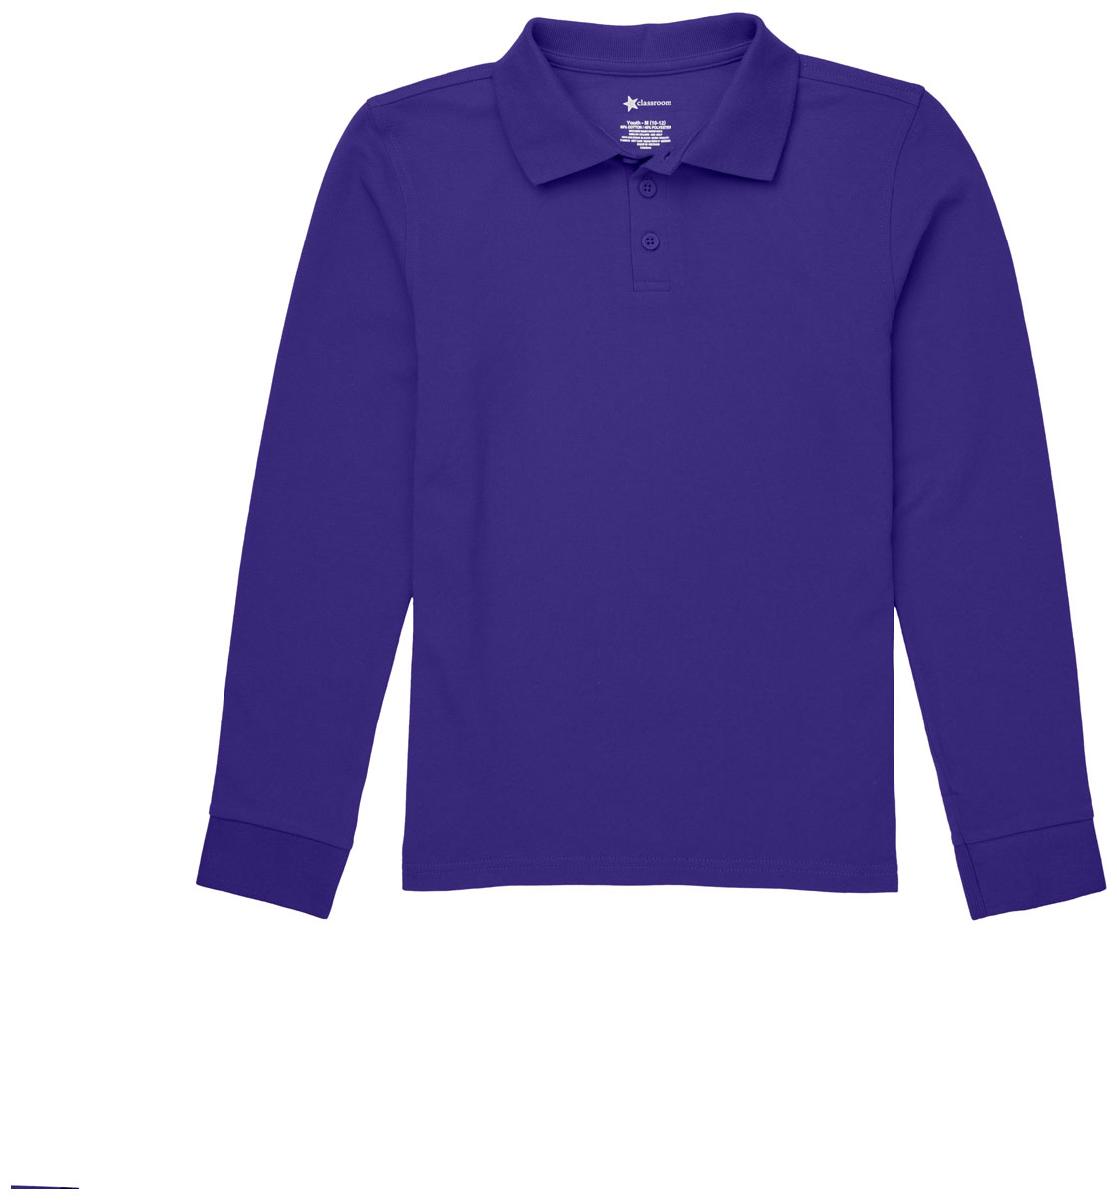  Youth - Long Sleeve Pique Polo (Unisex)